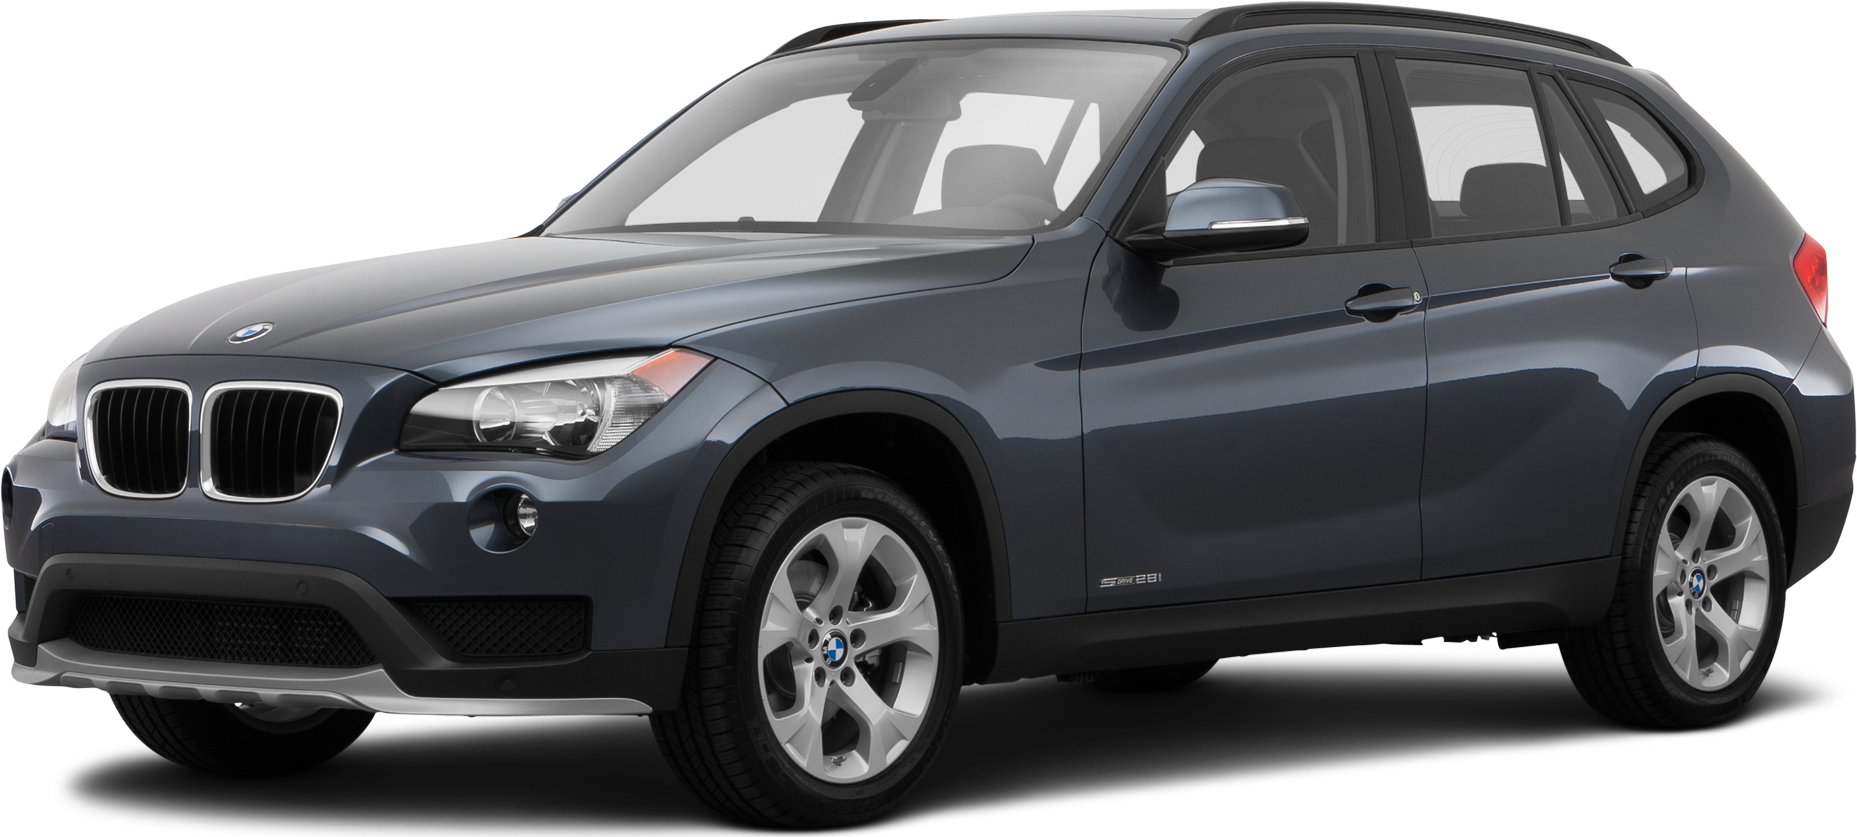 2015 BMW X1 Price, Value, Ratings & Reviews